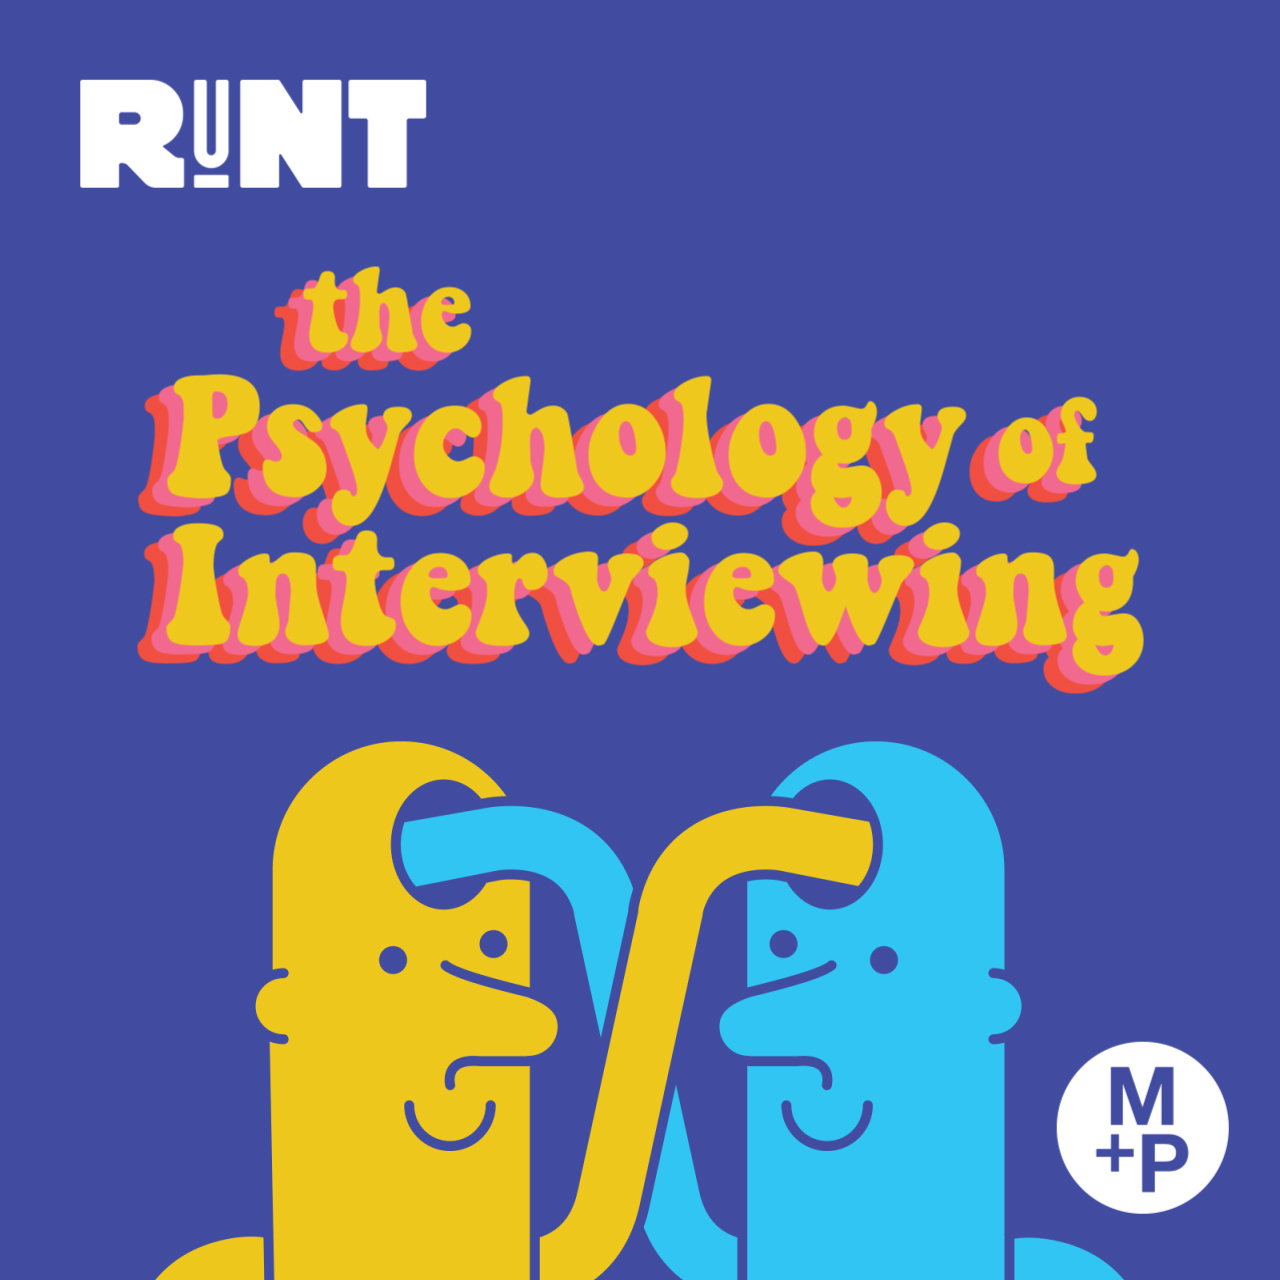 RuNT: The Psychology of Interviewing